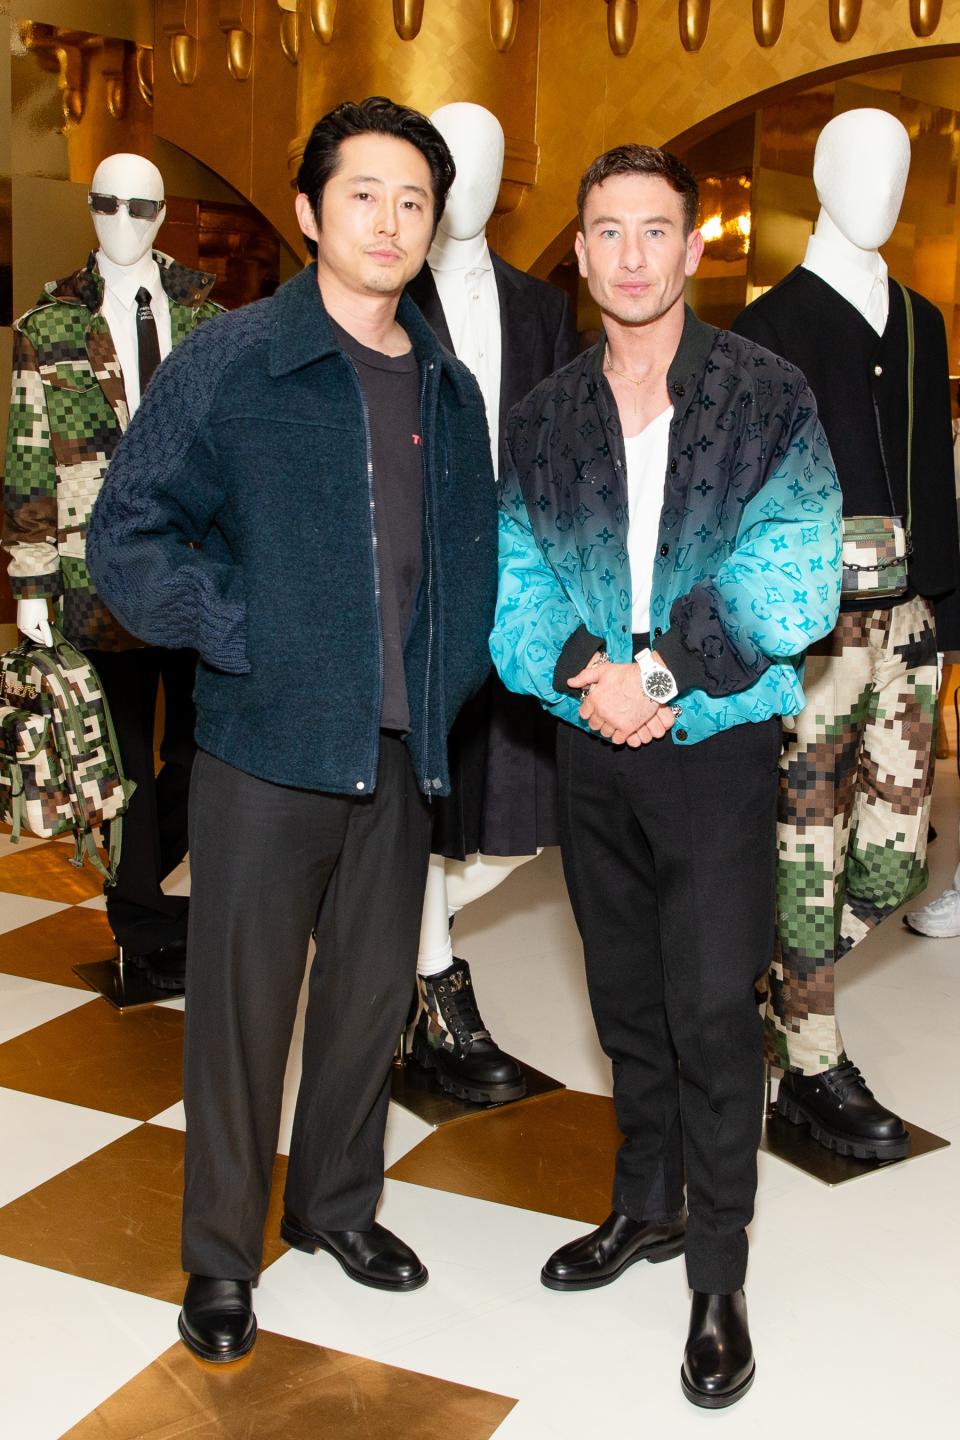 Steven Yeun, Barry Keoghan, boots, Louis Vuitton, menswear, spring 2024, spring 2024 fashion, spring 2024 menswear, mens, Pharrell, Pharrell Williams, New York City, Los Angeles, fashion, fashion news, retail, retail news, stores, boutiques, shoes, footwear, events, parties 